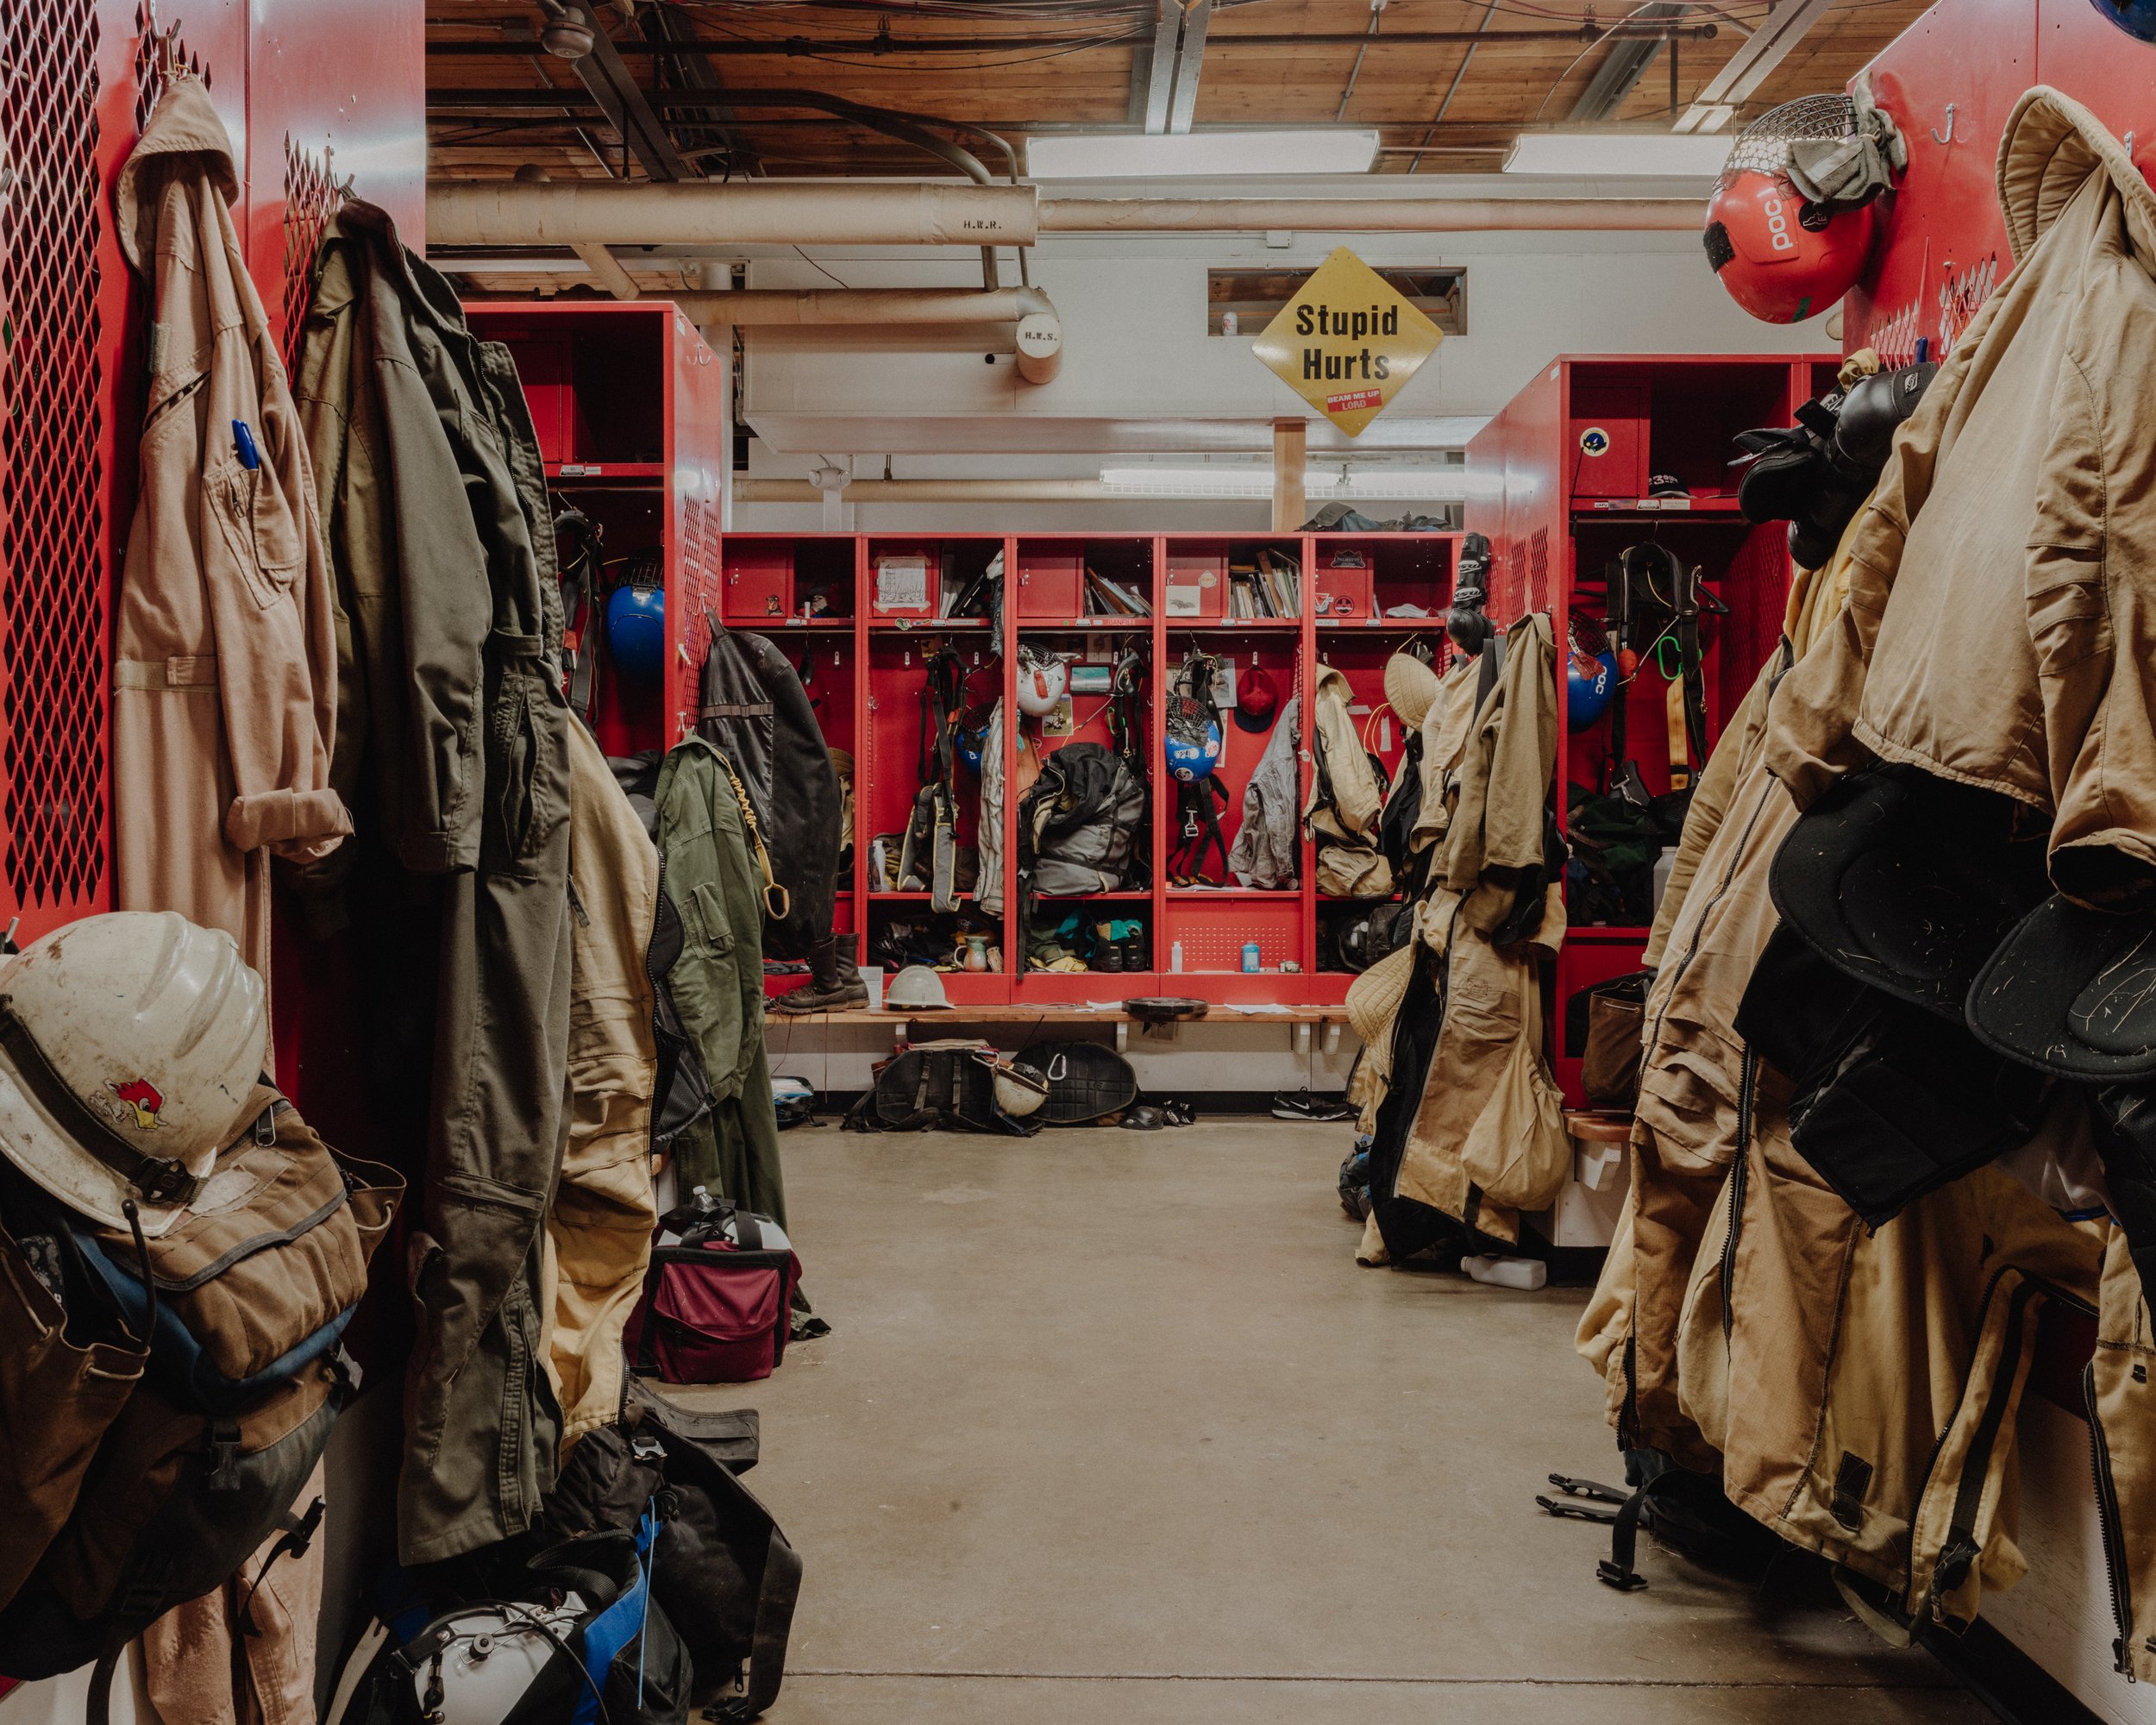  Inside of the Missoula Smokejumper base, the “ready room” is where smokejumpers get ready before they leave for the aircraft - photographed for  BuzzFeed News  